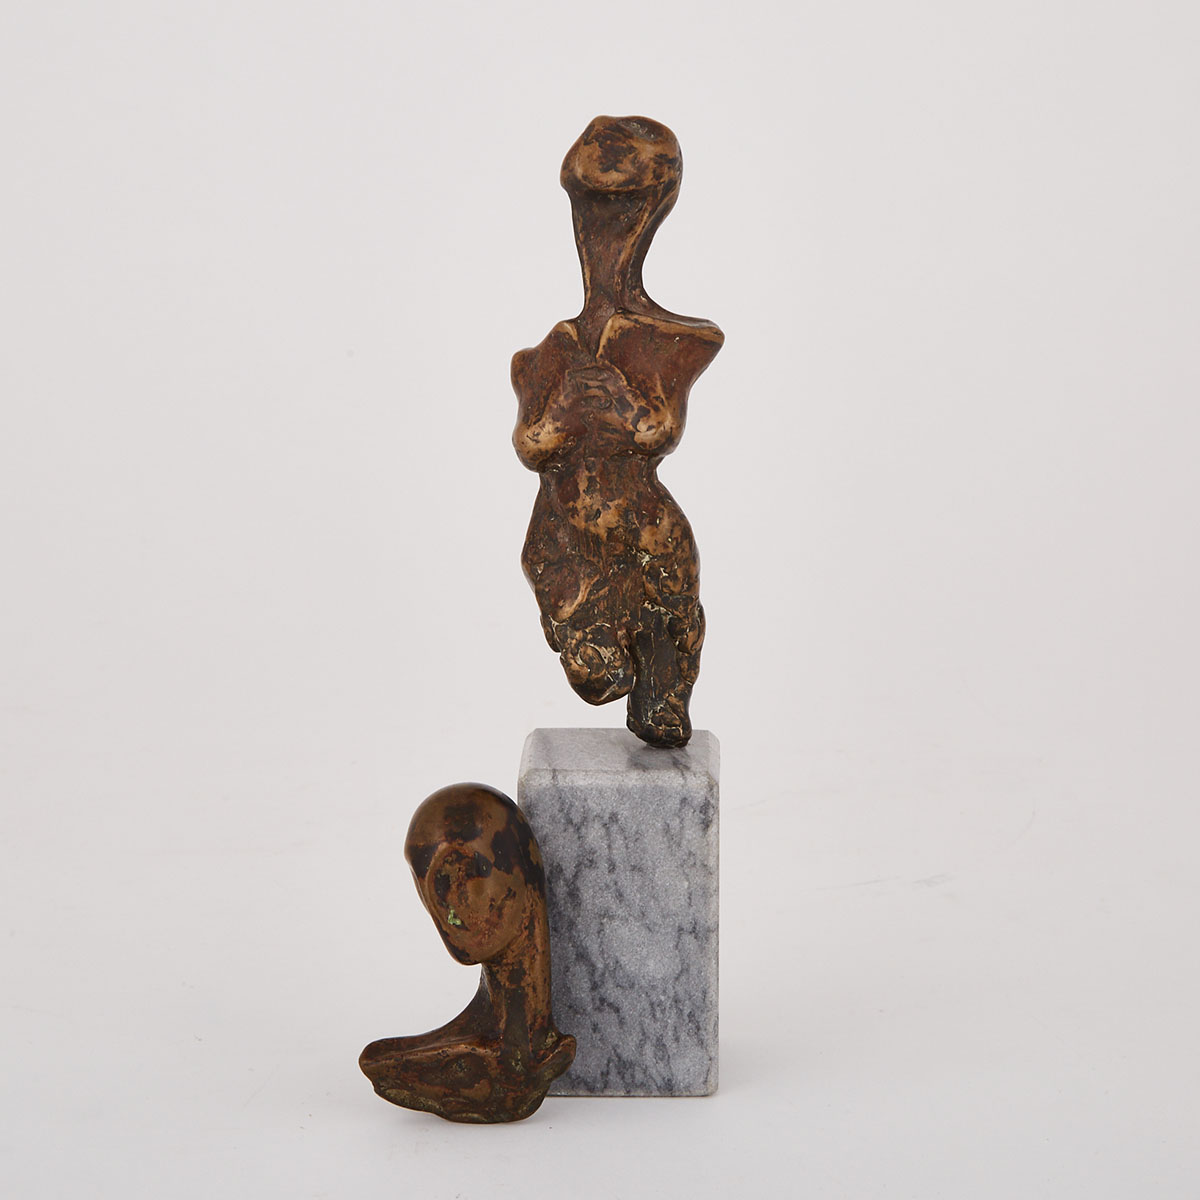 Two Canadian School Works: Abstract Torso and Head, mid 20th century